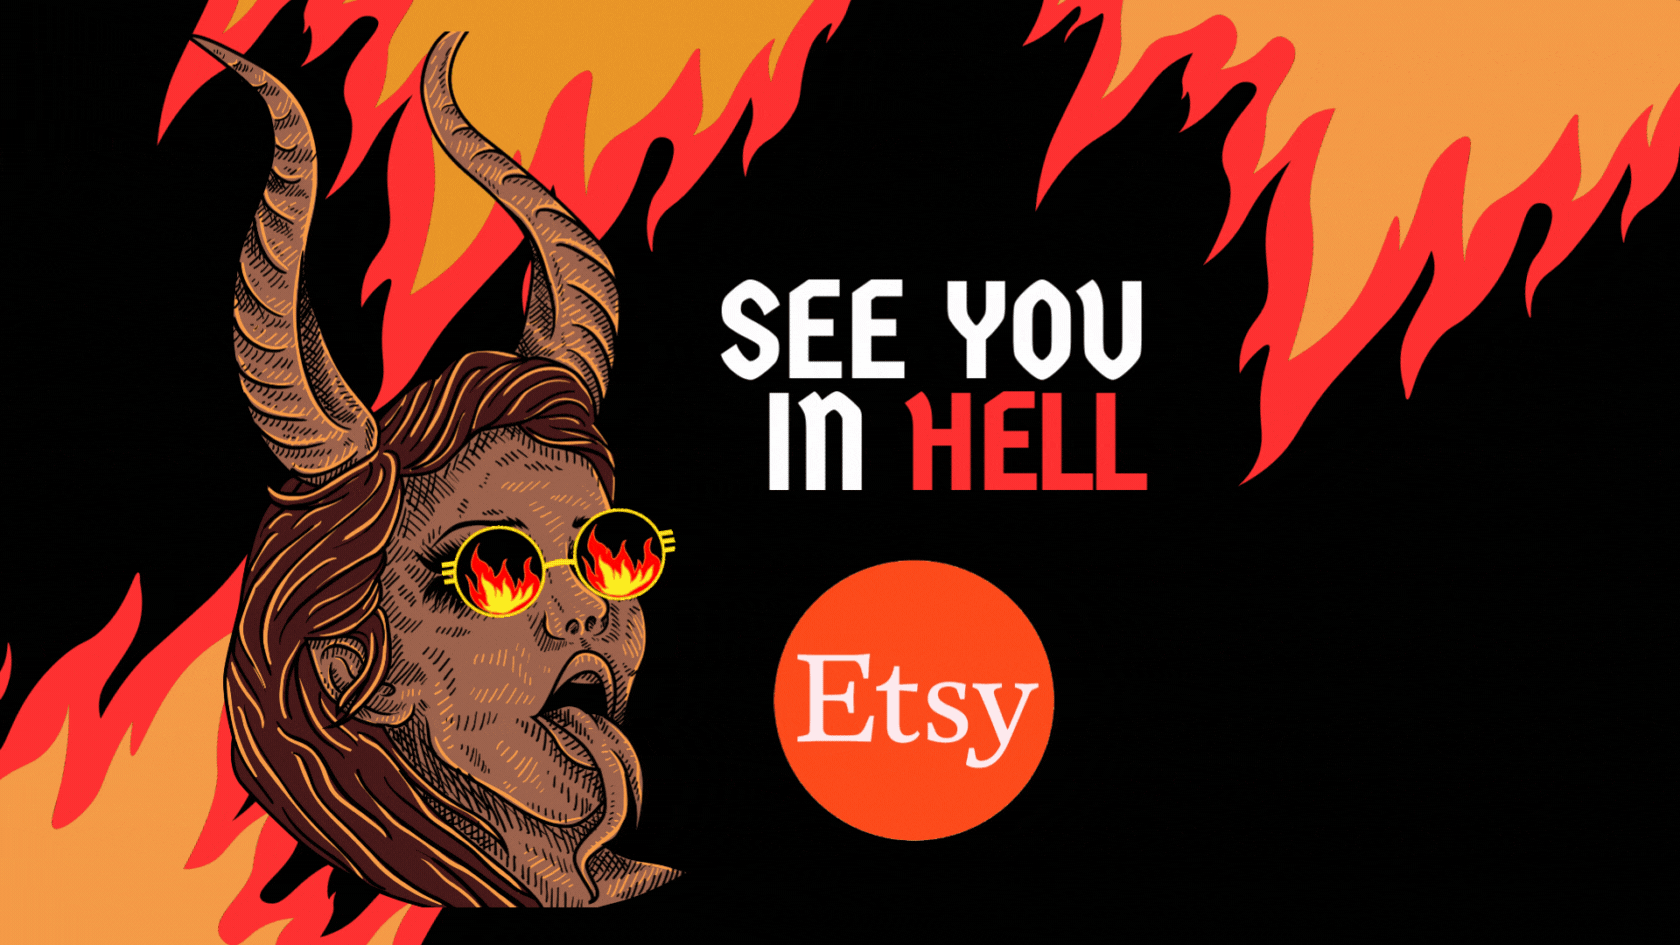 See you in Hell Etsy - Why you won't find us on Etsy Anymore